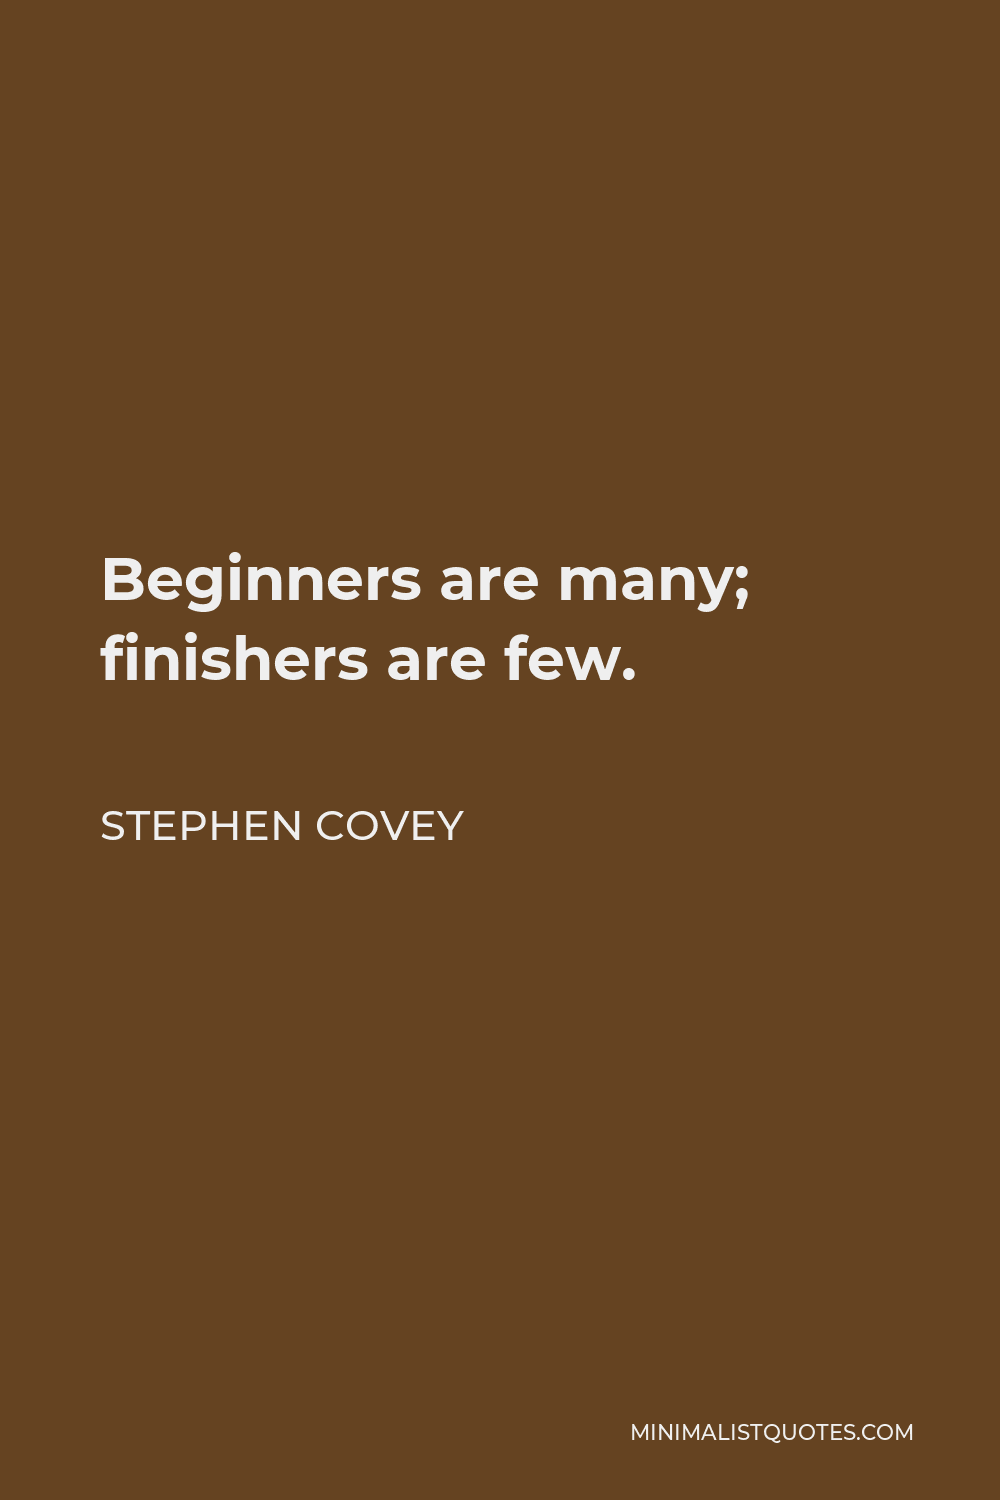 Stephen Covey Quote - Beginners are many; finishers are few.